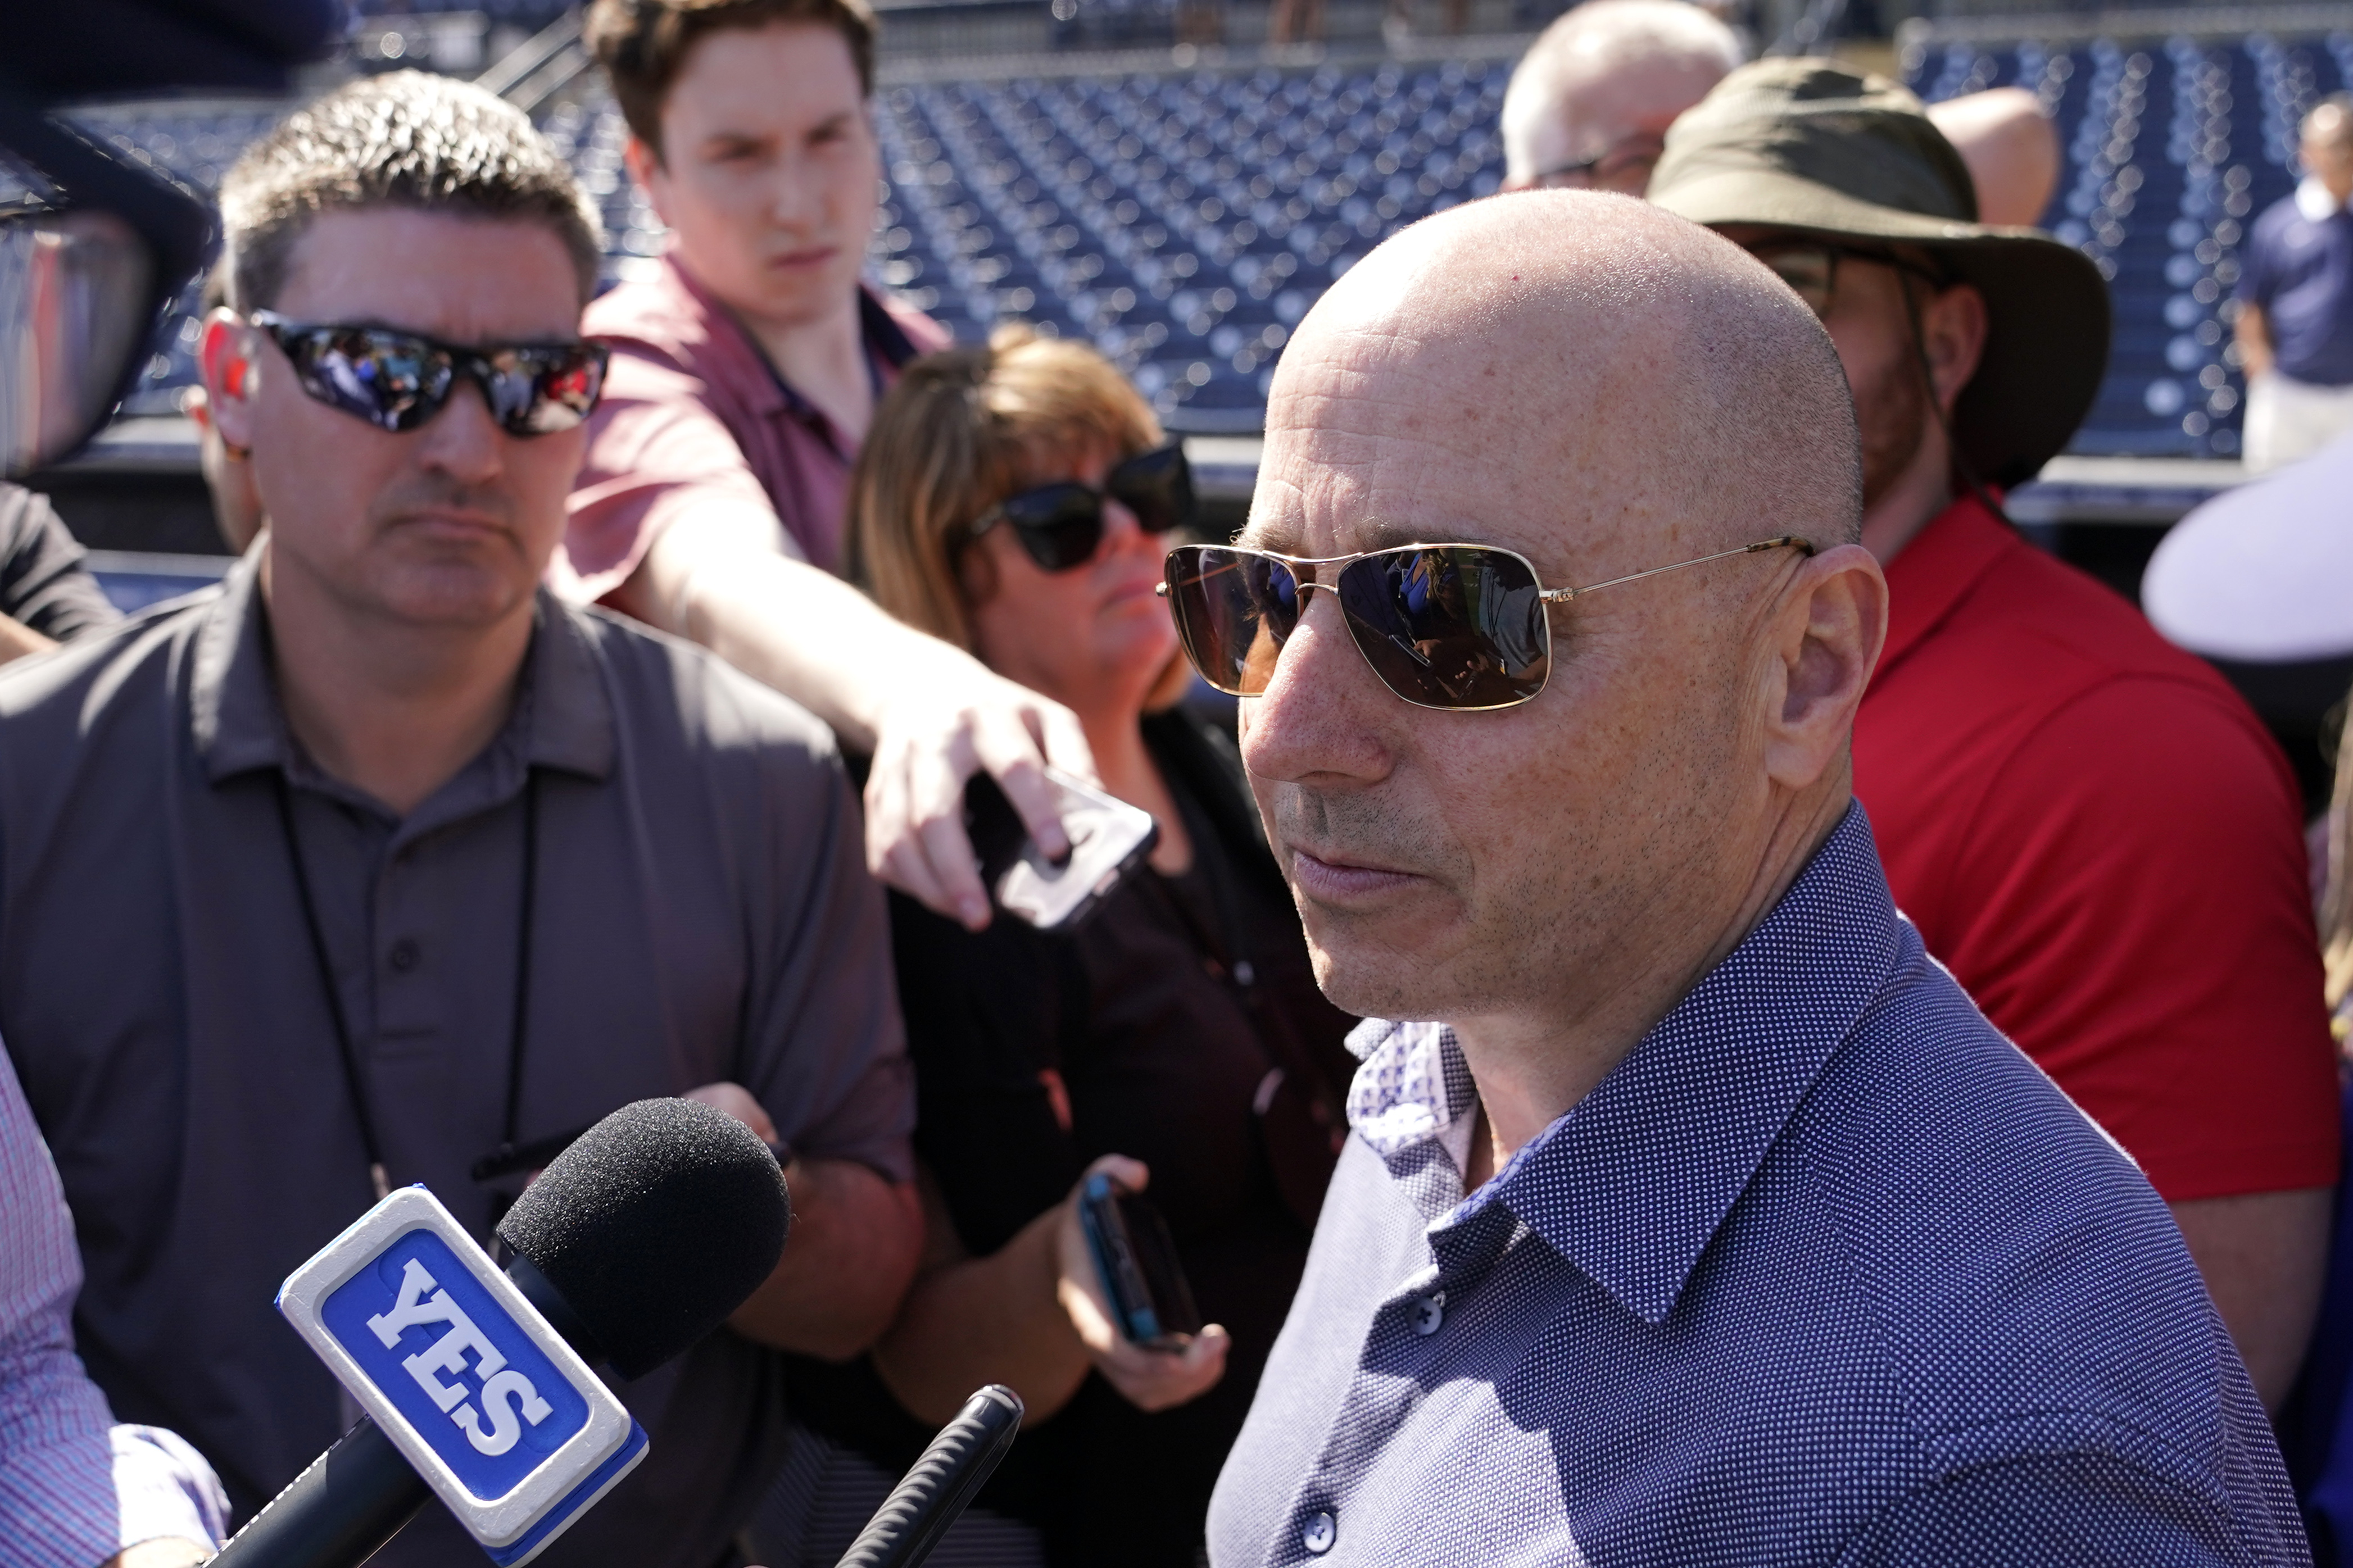 Is trading for Joey Gallo enough to redeem Brian Cashman?